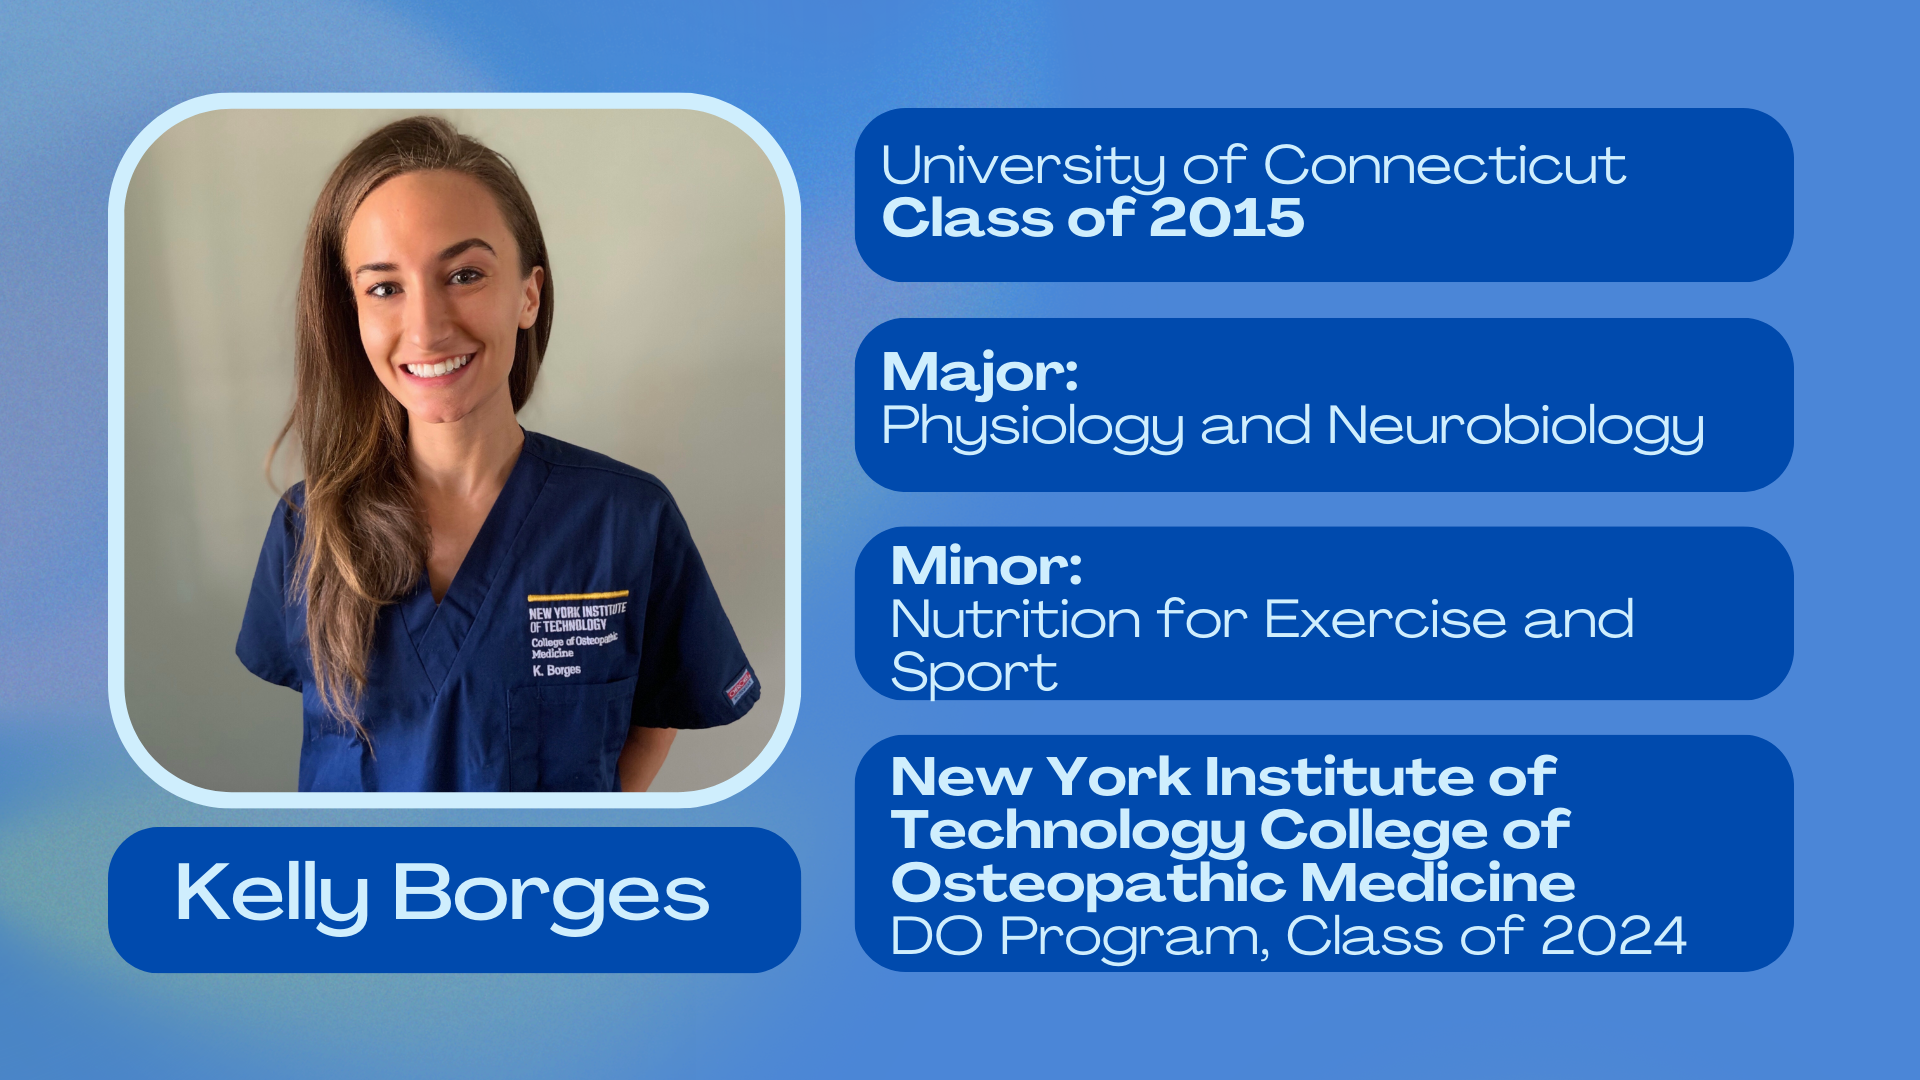 Kelly Borges; University of Connecticut class of 2015; Major: Physiology and Neurobiology; Minor: Nutrition for Exercise and Sport; New York Institute of Technology College of Medicine DO program class of 2024